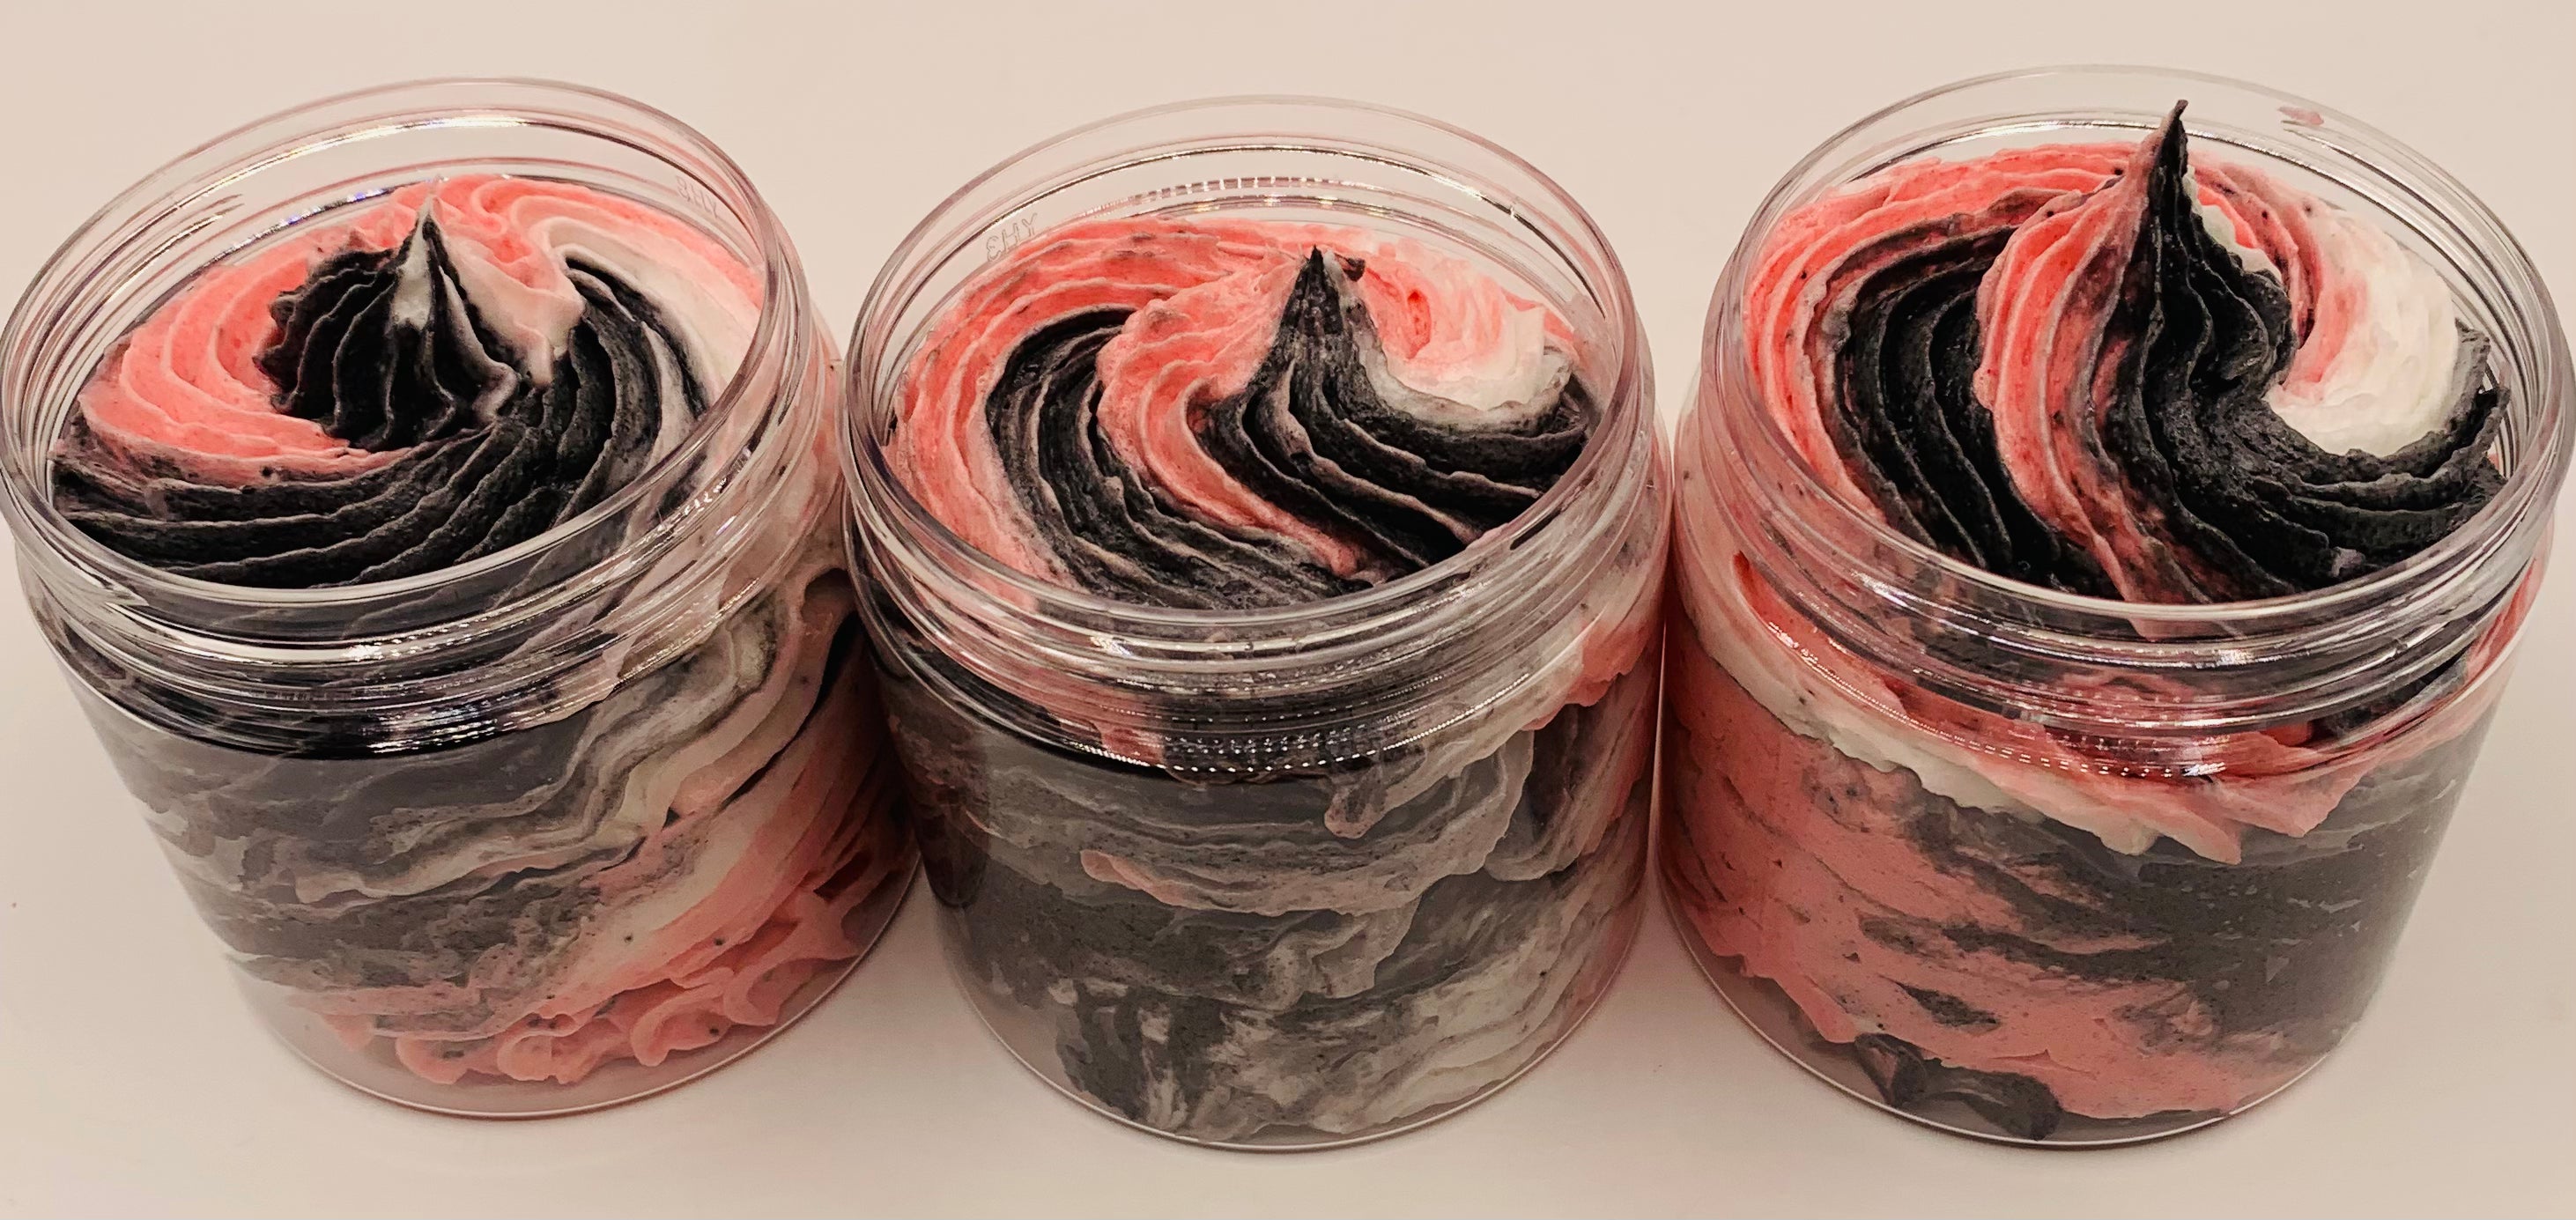 Black Cherry Whipped Soap